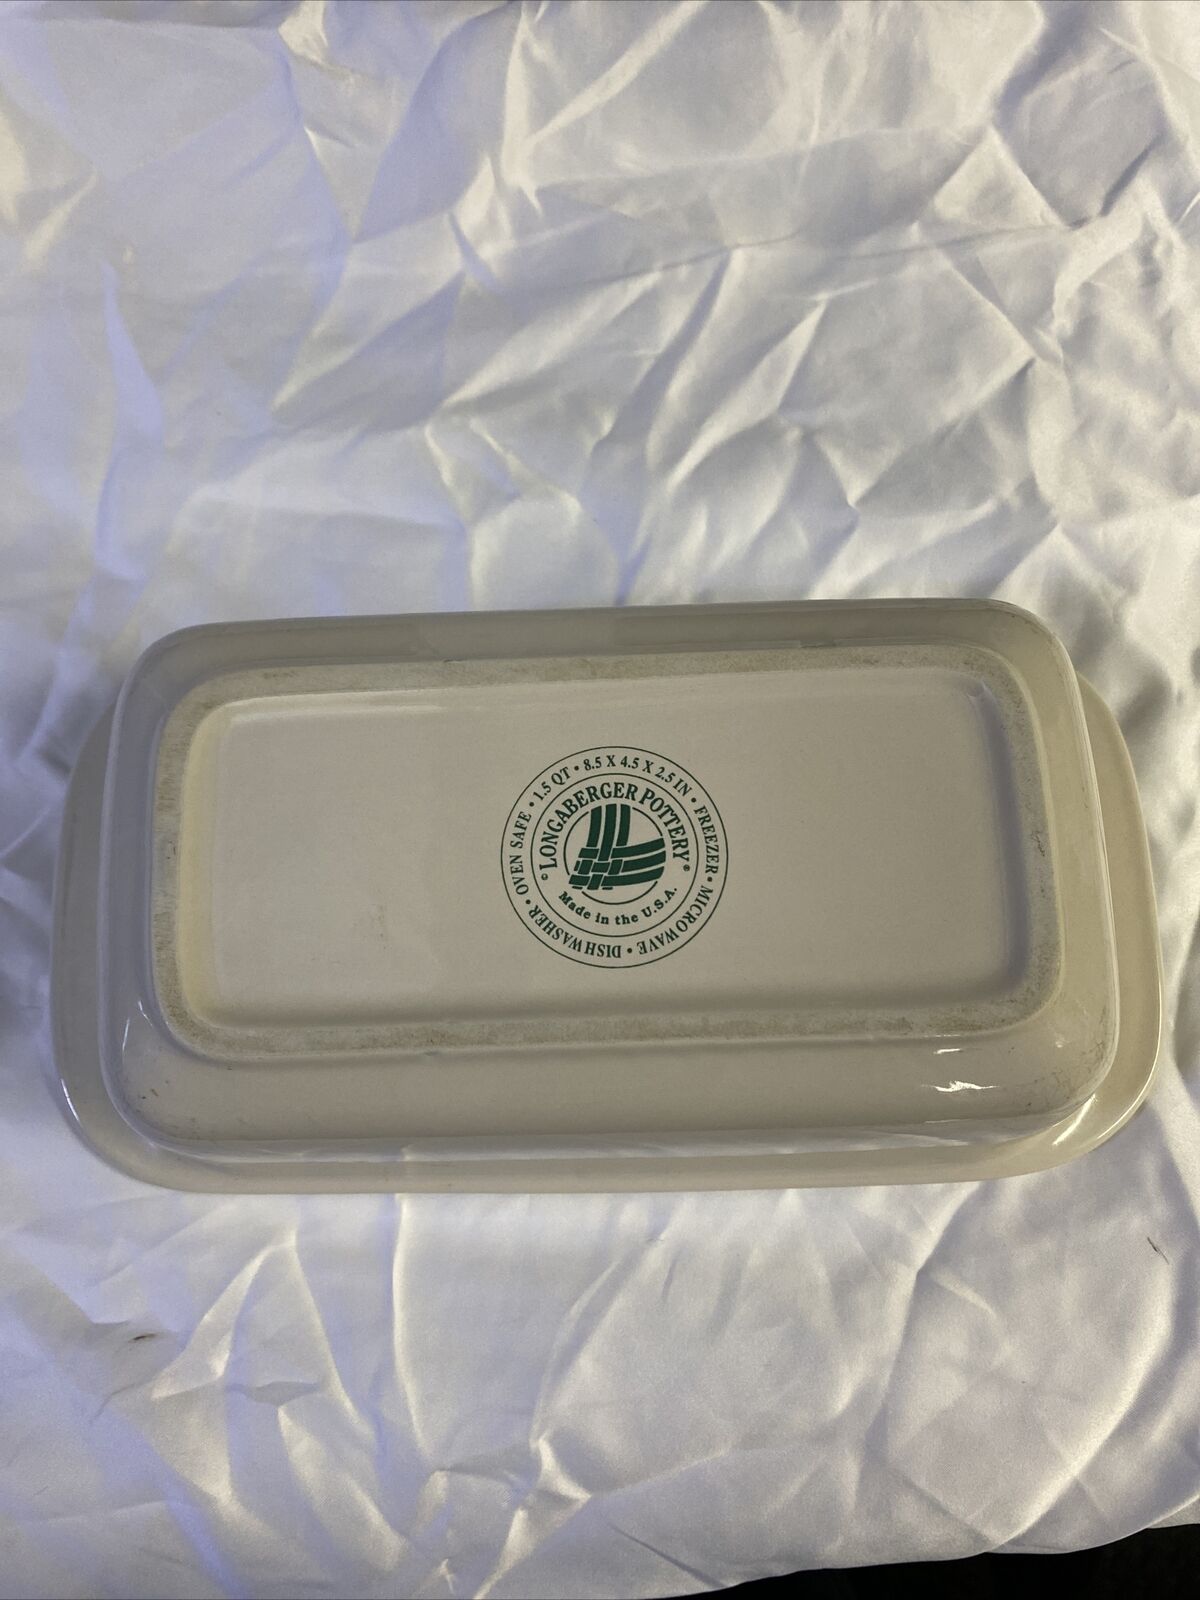 Longaberger Pottery Woven Traditions Classic Green Loaf Dish 1.5QT,8.5x4.5x2.5IN